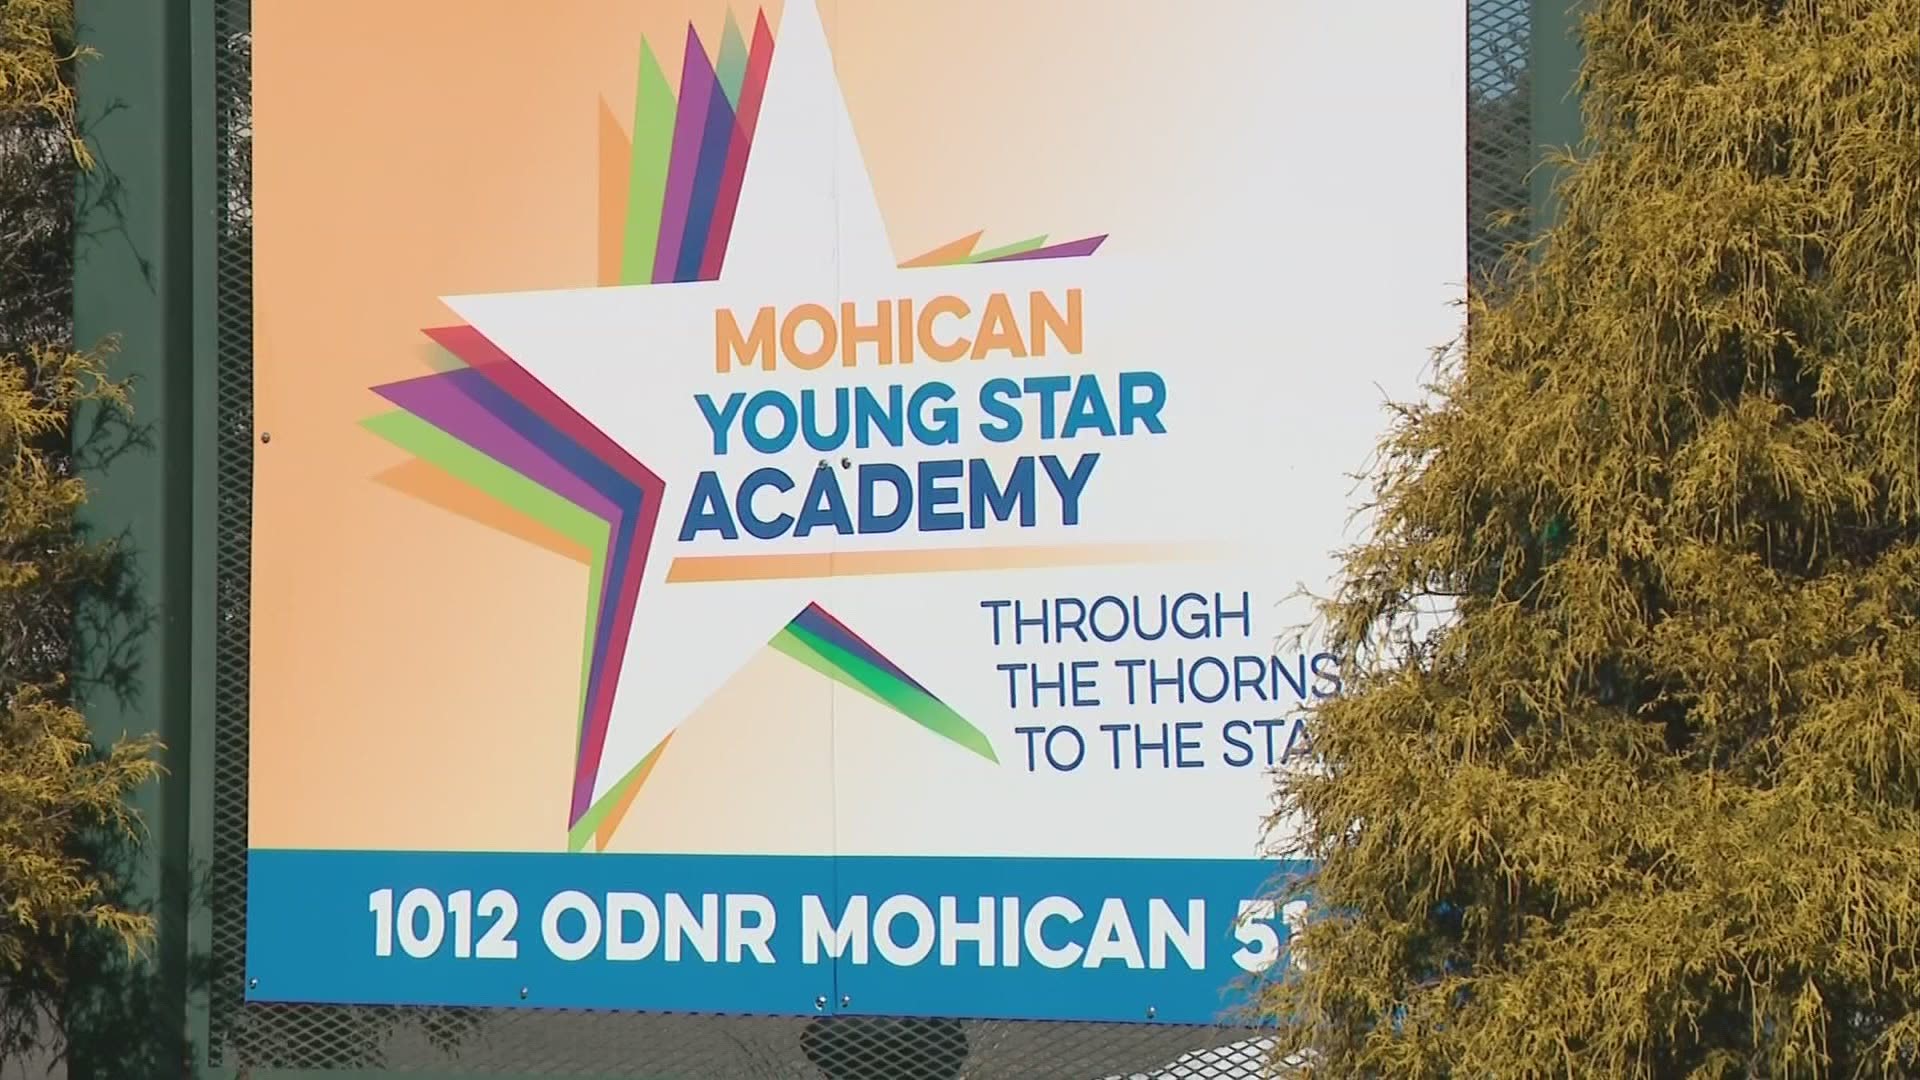 Olga Starr, the owner of Mohican Young Star Academy, said the state’s allegations of illegal restraints are “simply false."